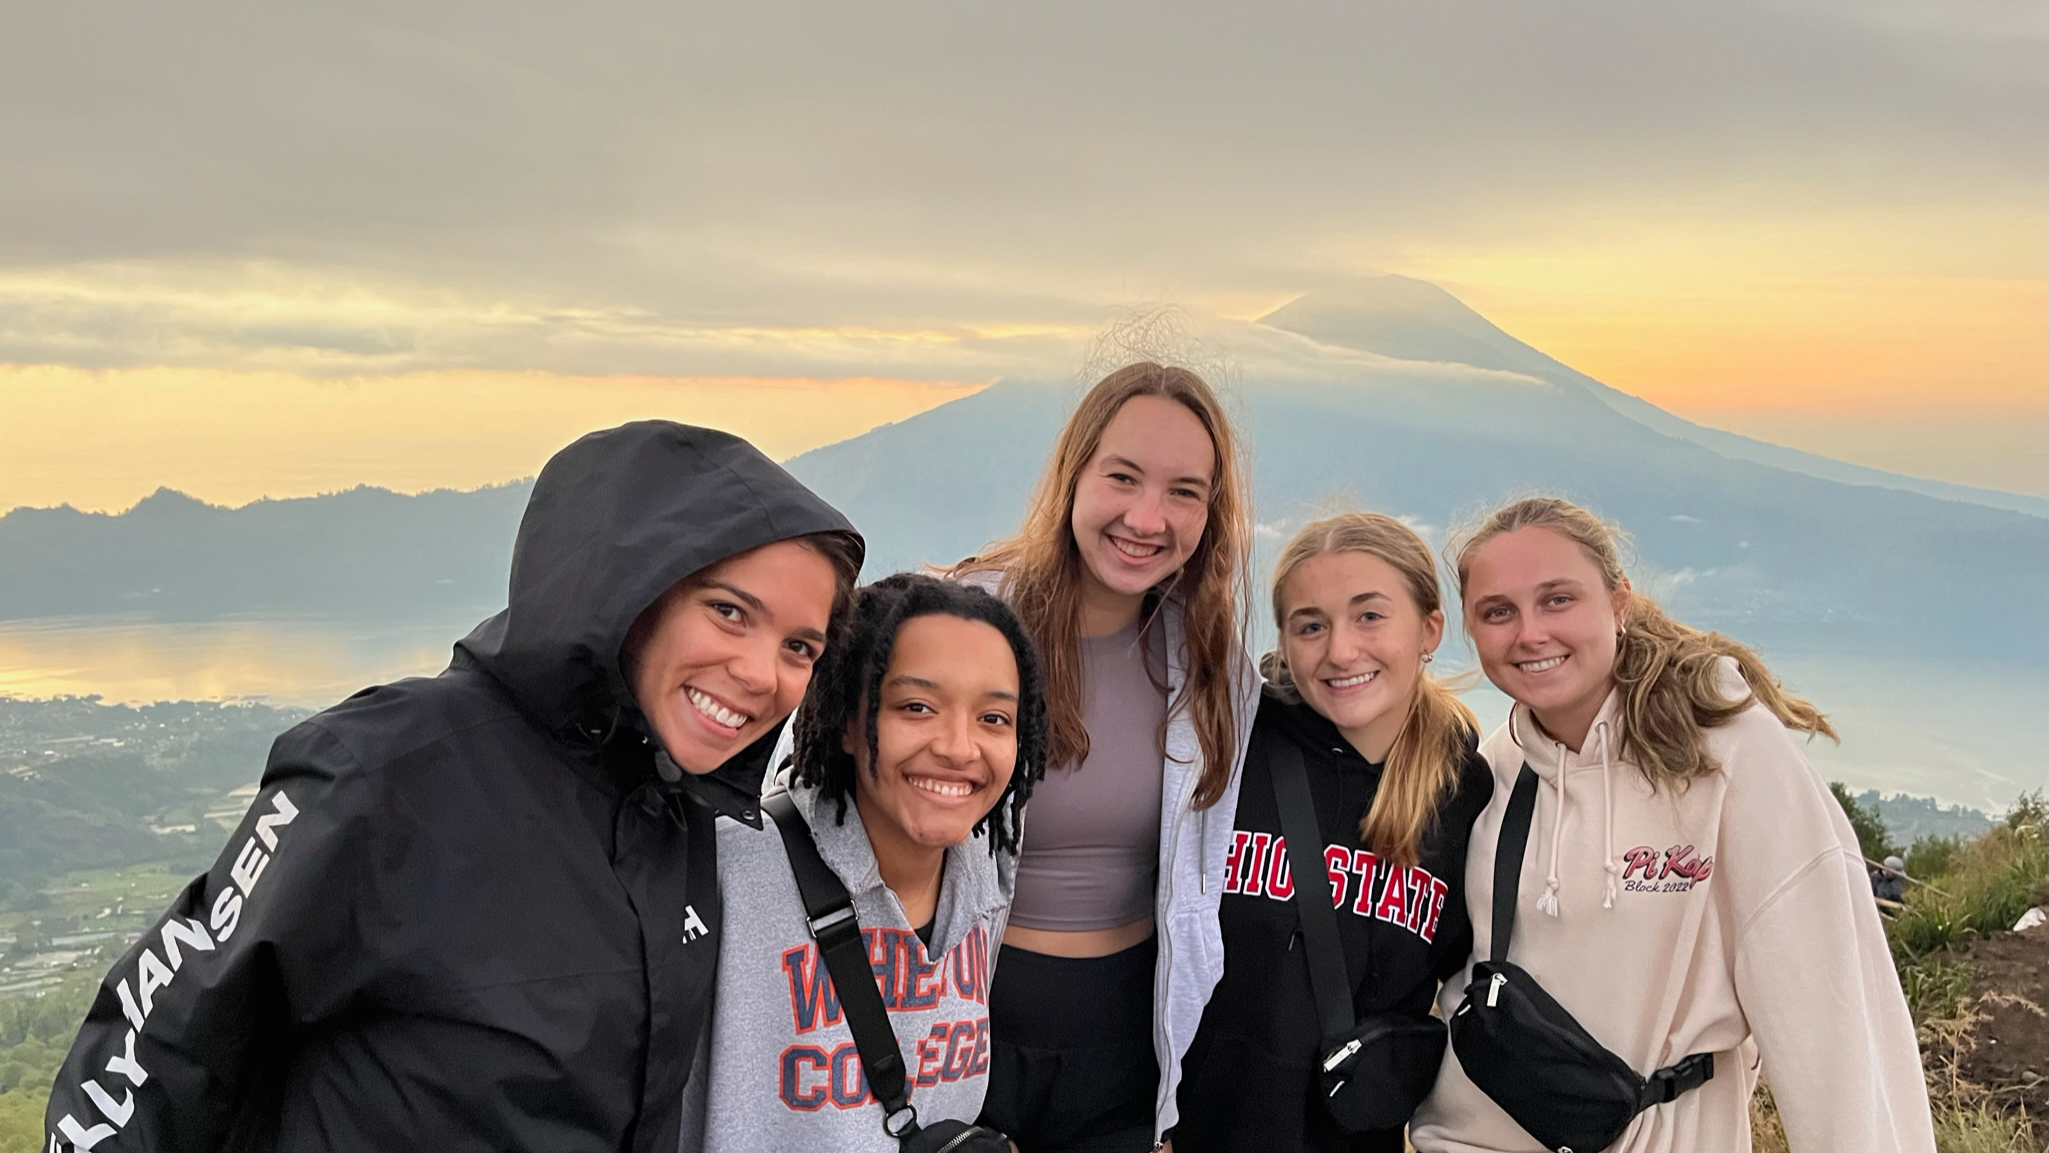 A group of students standing in front of a sunset with a mountain in the background.